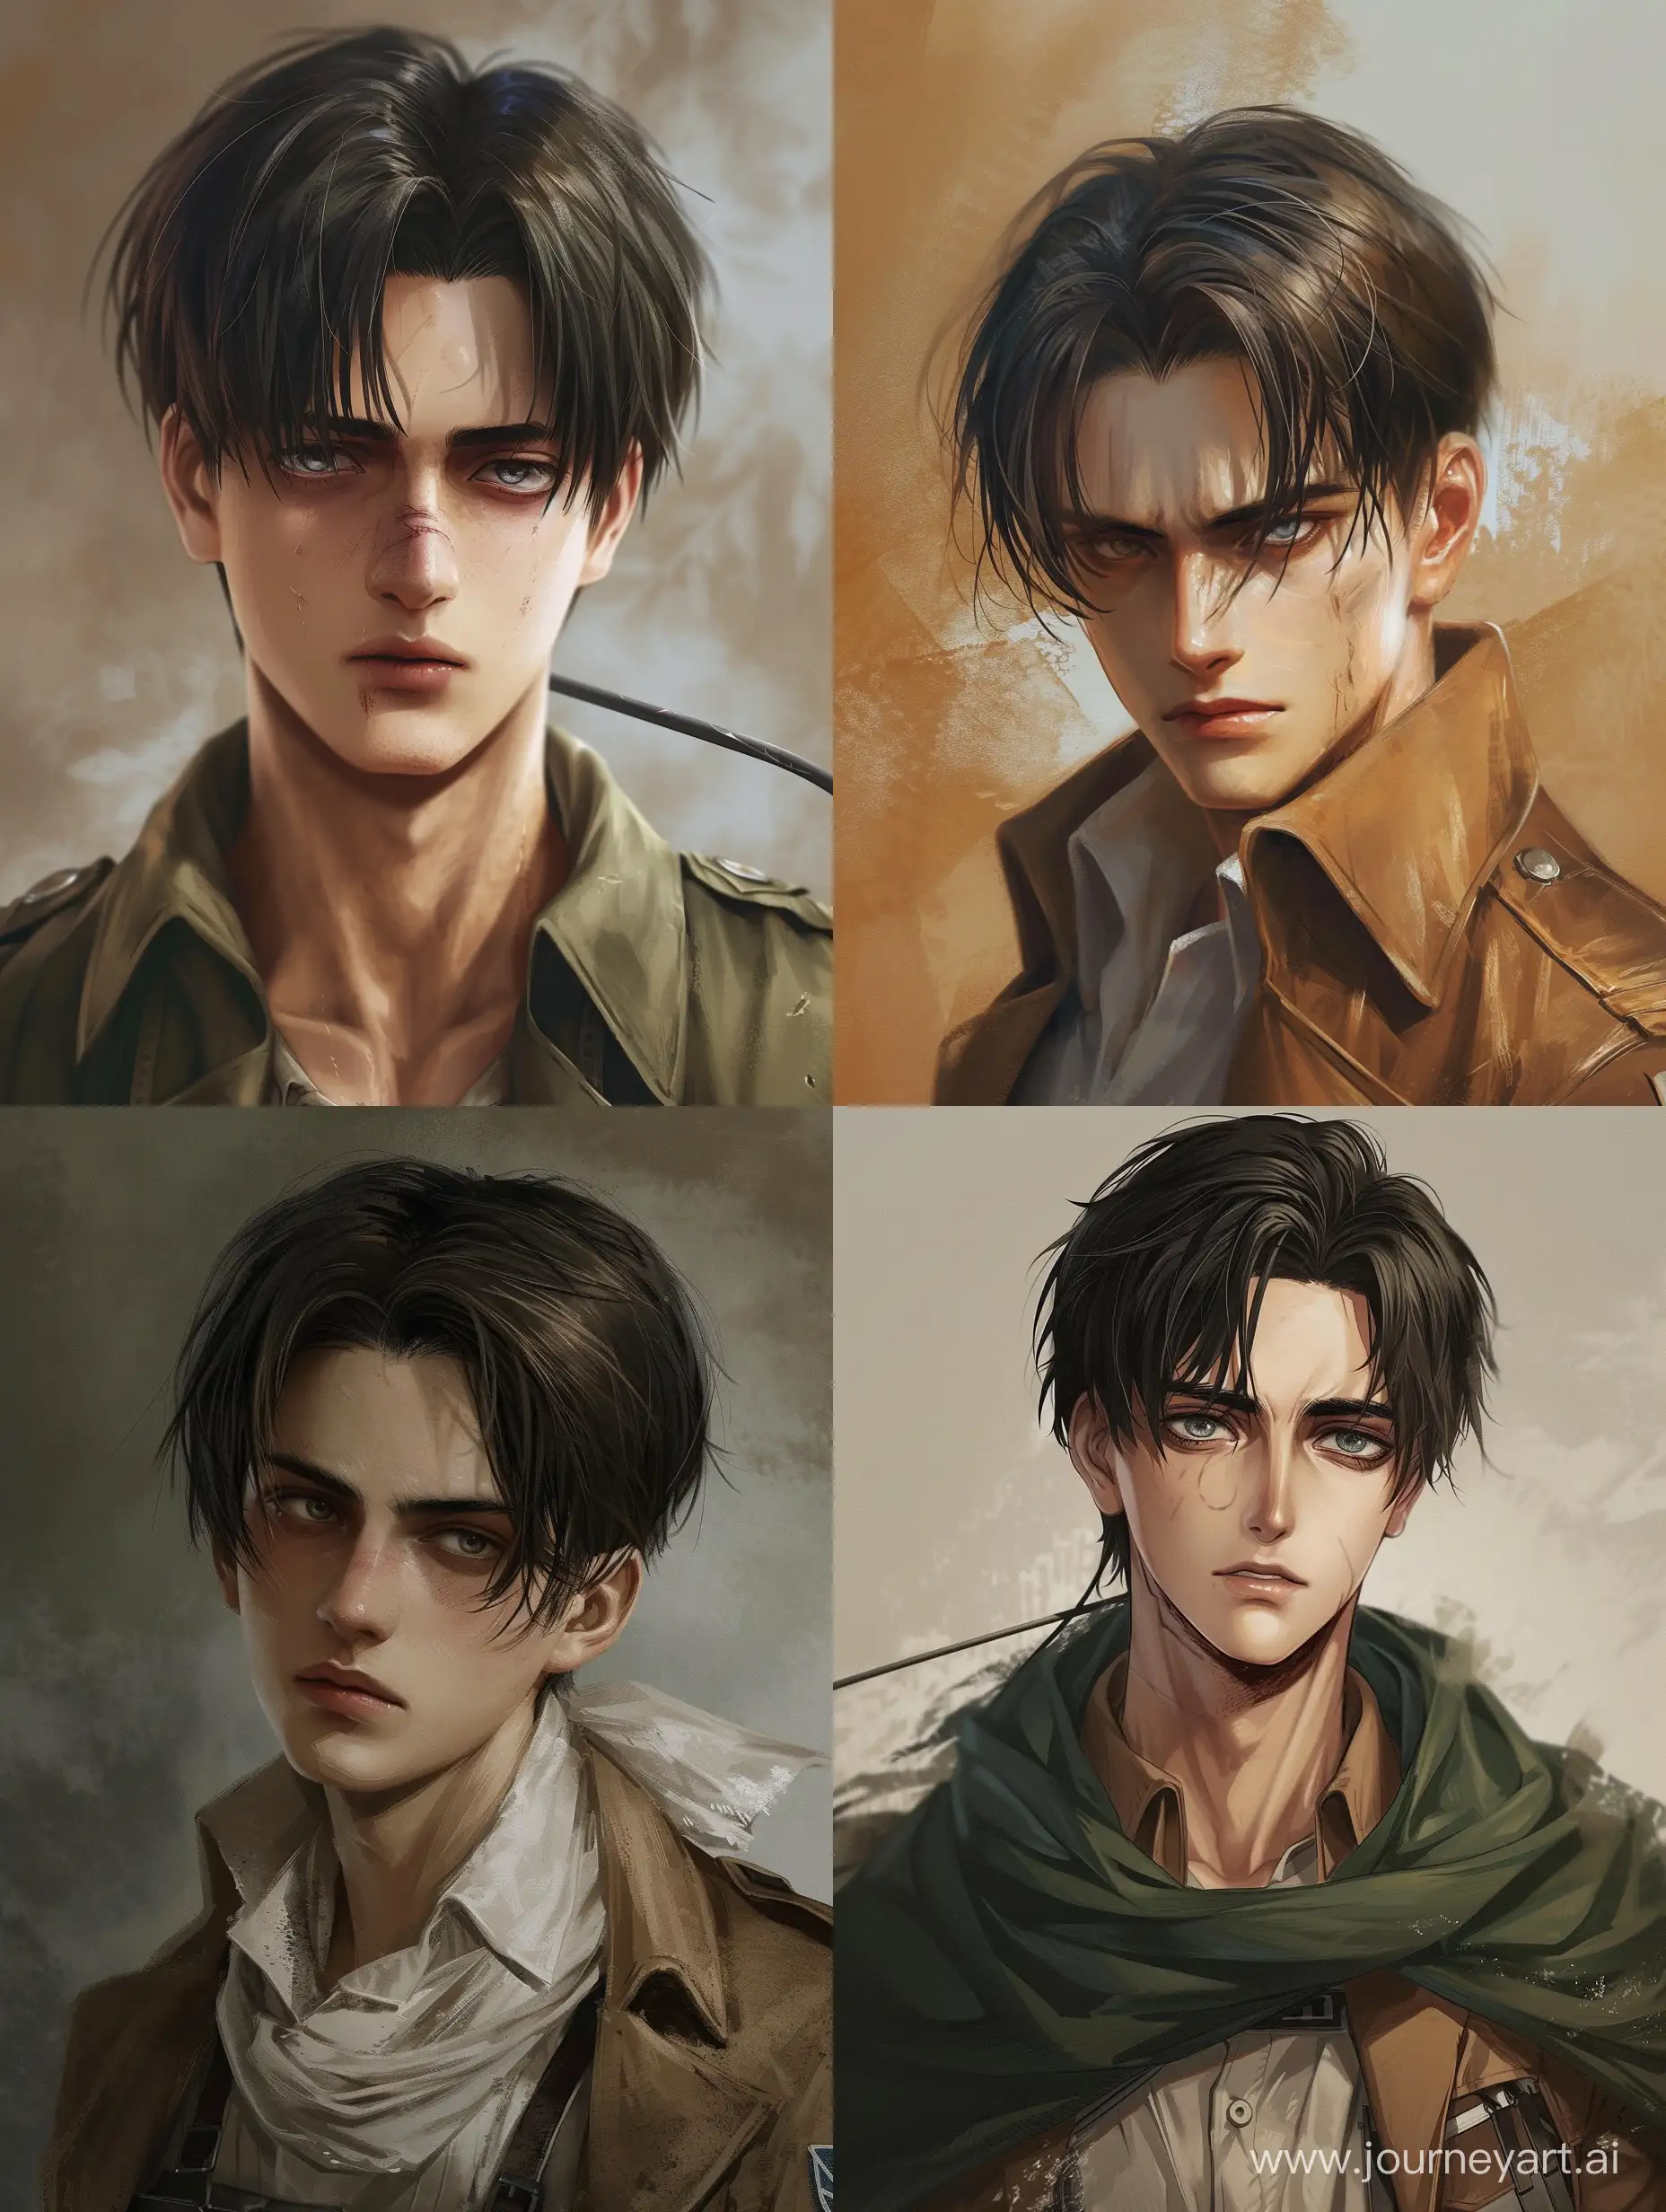 Realistic-Levi-Ackerman-Portrait-in-his-30s-with-a-Slight-Smirk